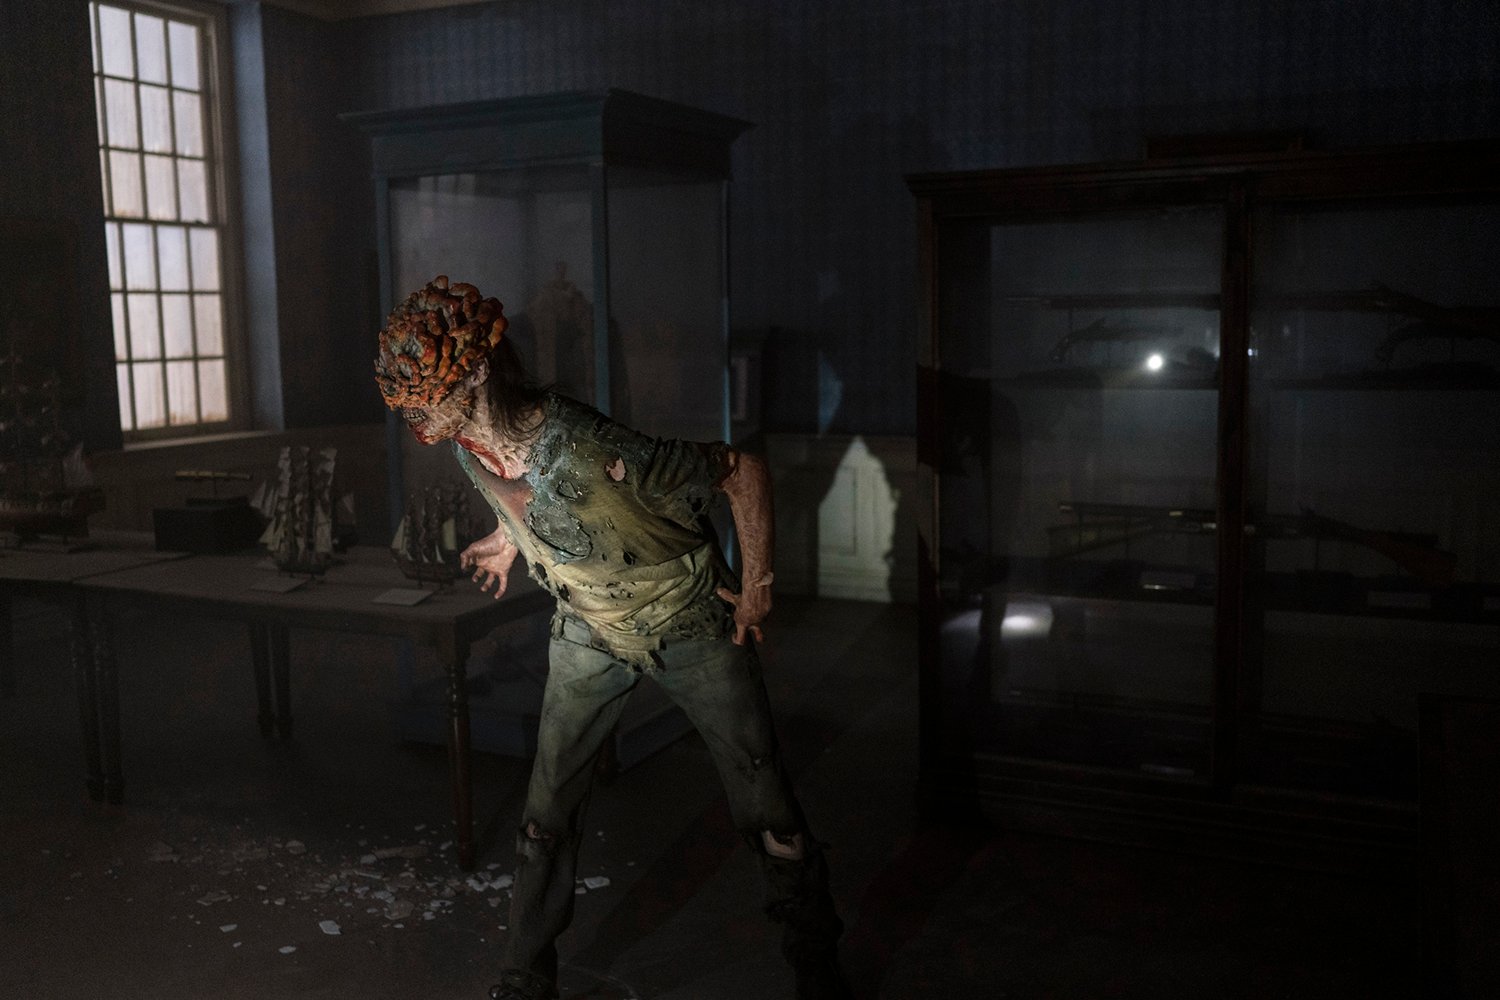 A Clicker roams the dark museum in The Last of Us Episode 2.